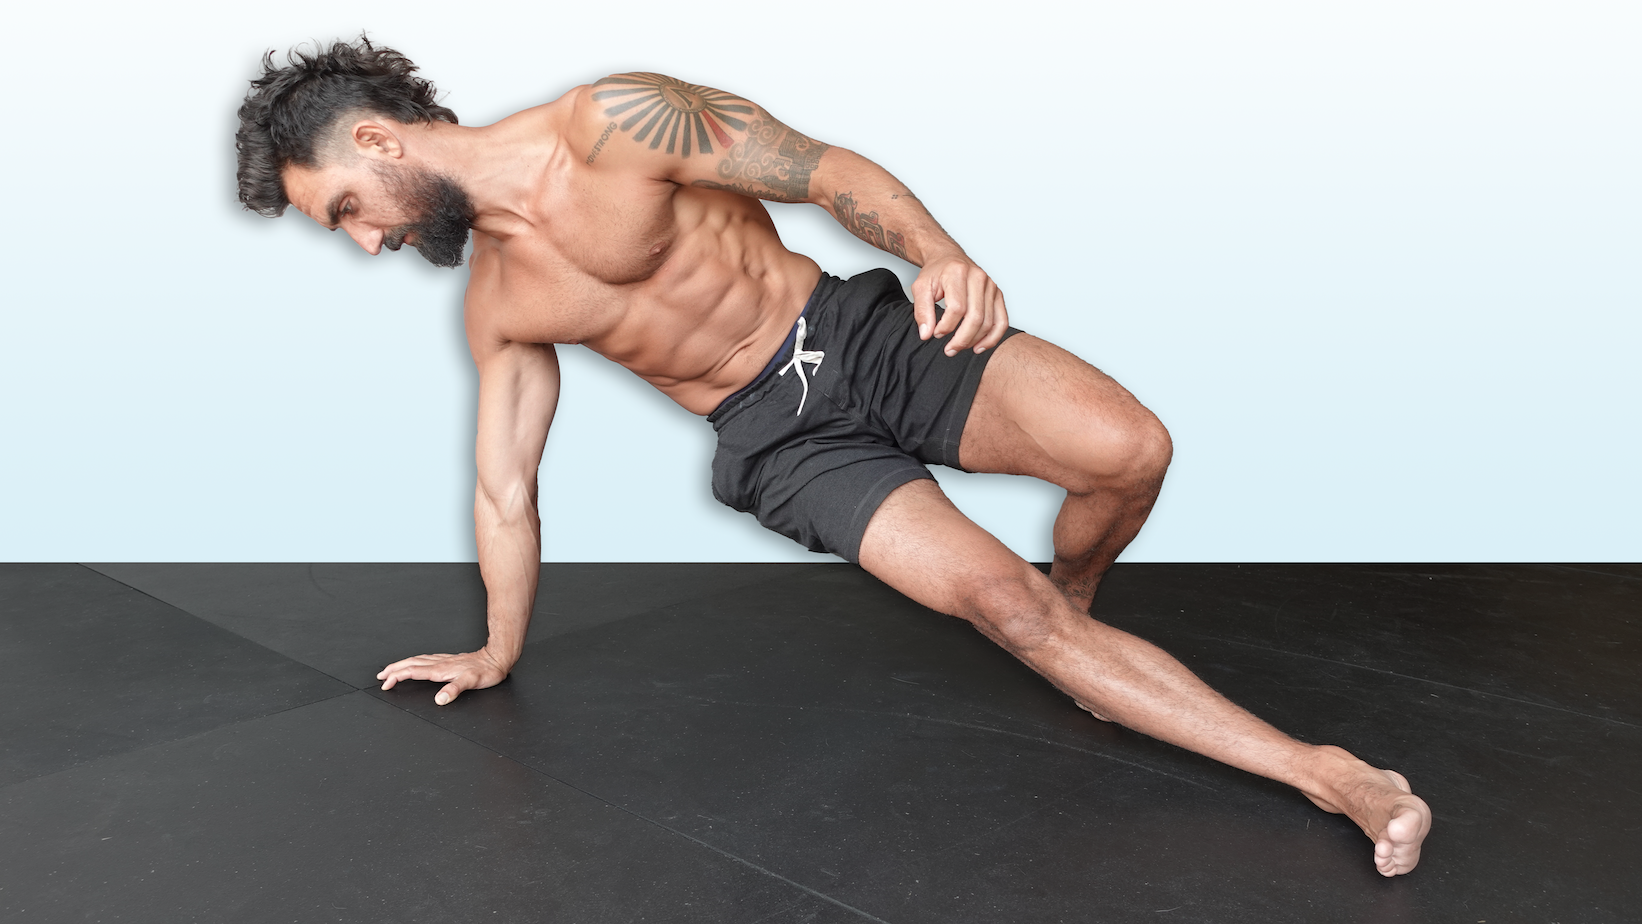 Unlock your best physique in 2 easy steps.